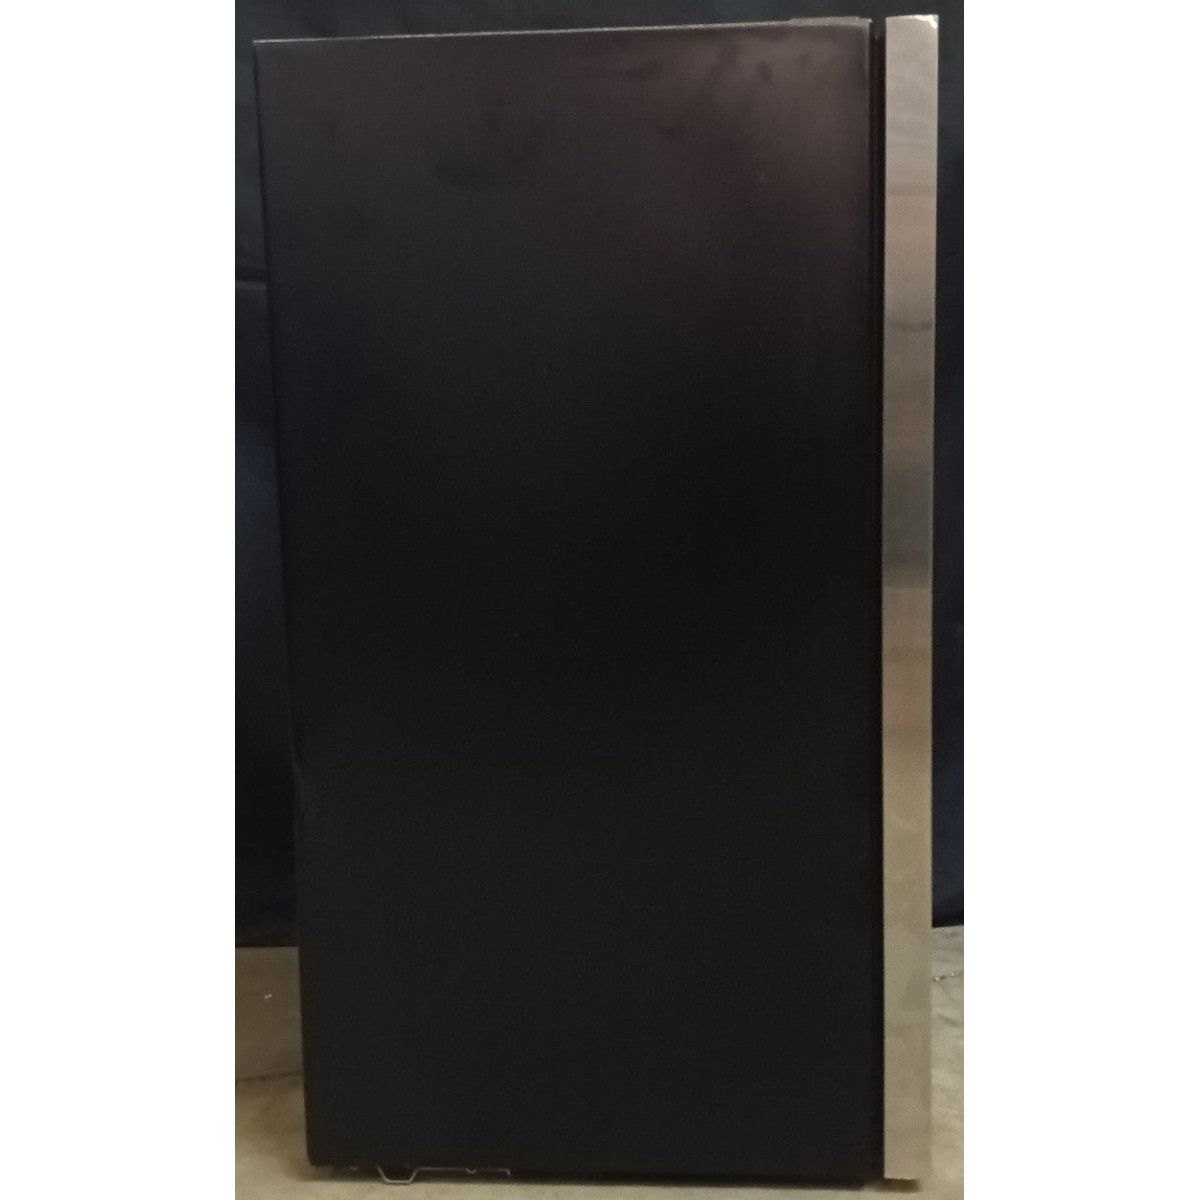 Whynter Freestanding 34 Bottle Wine Cooler Touch Screen FWC-341TS